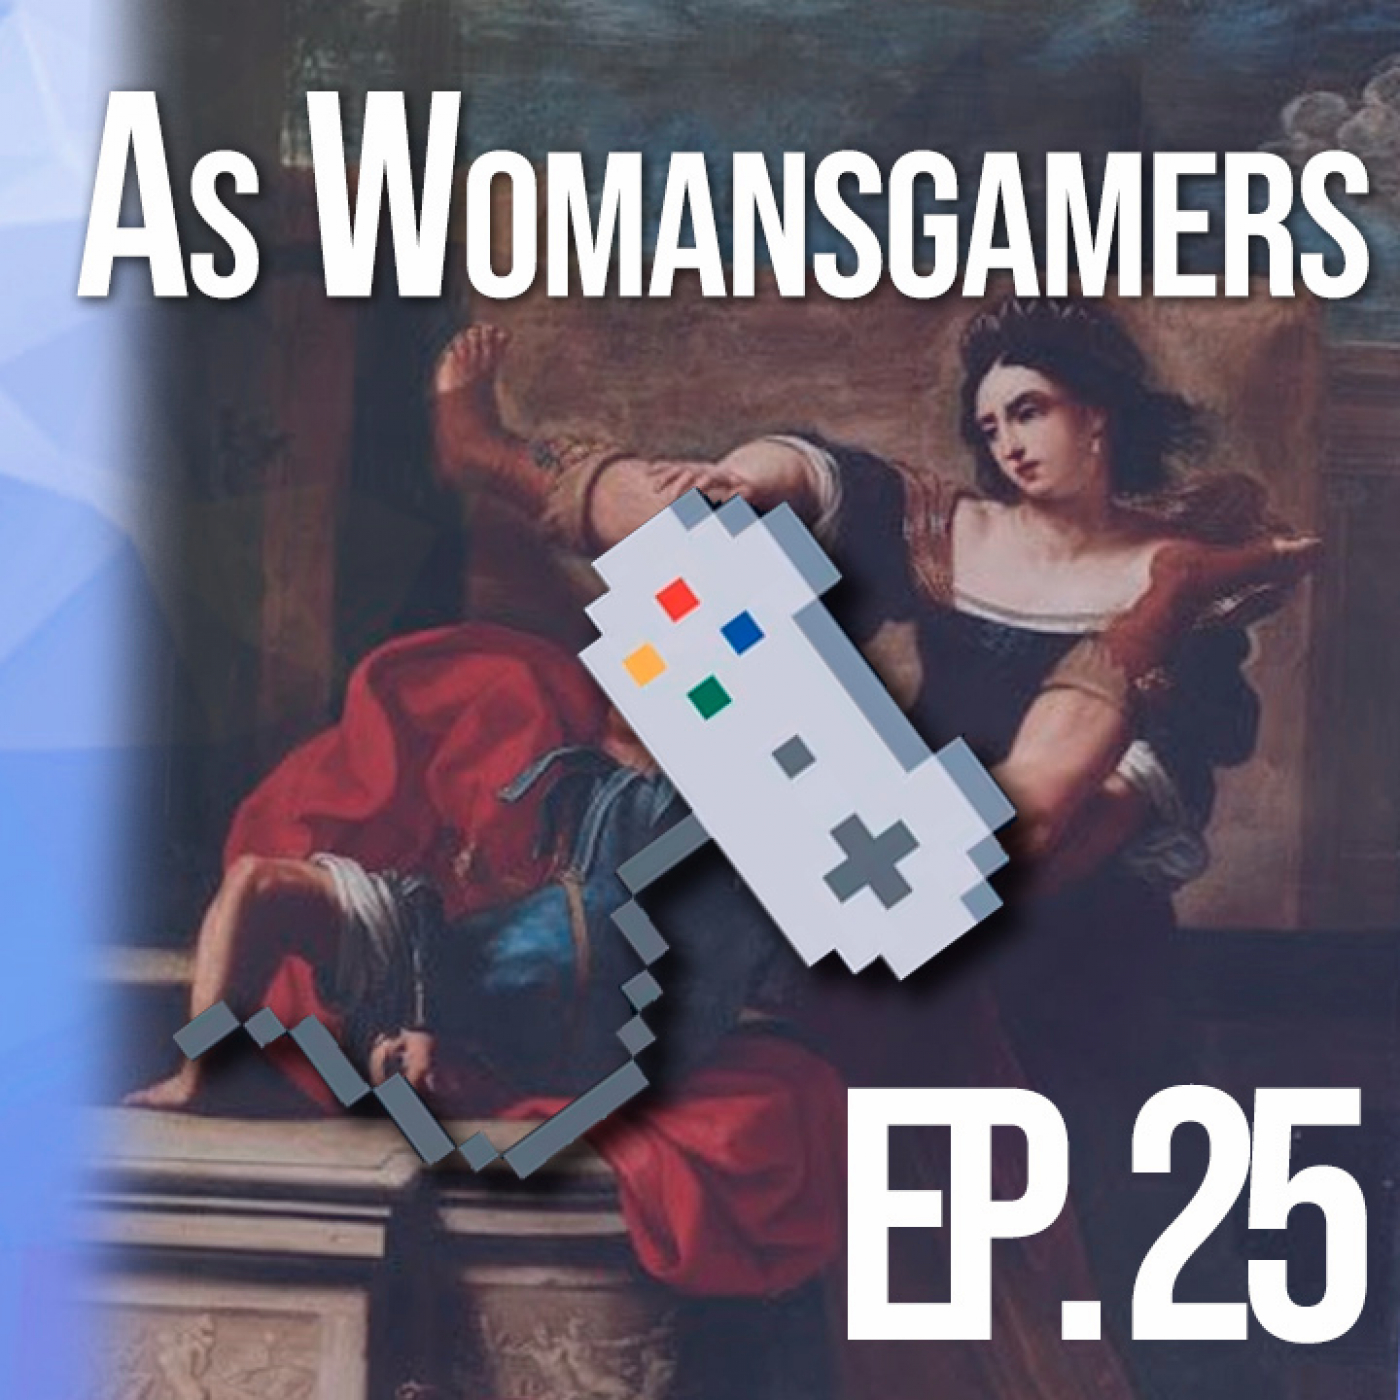 Recuncho Gamer Podcast Ep.25: As Womansgamers (coas Womansplainers)